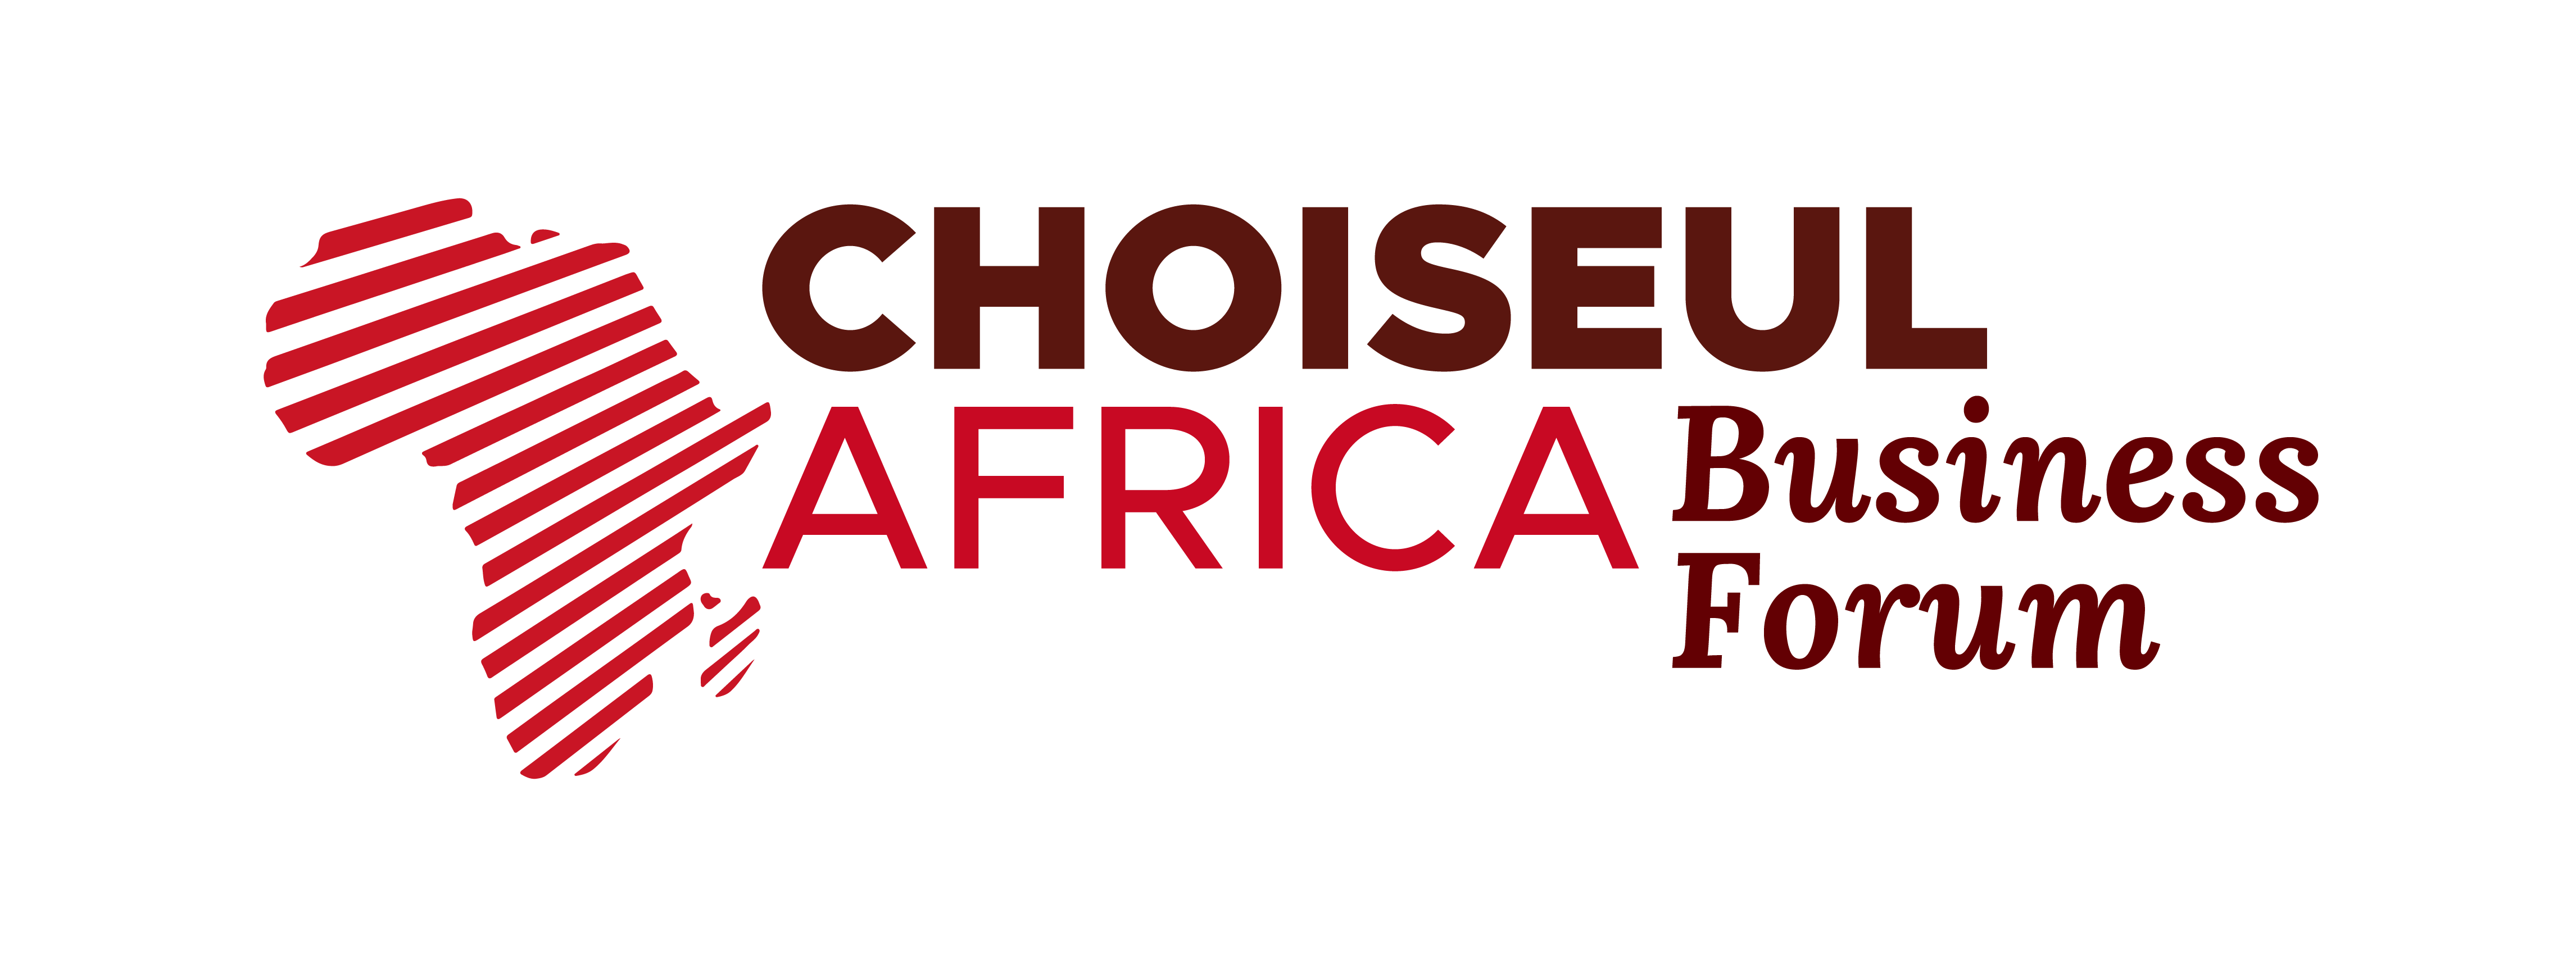 The most attend event of the African business community